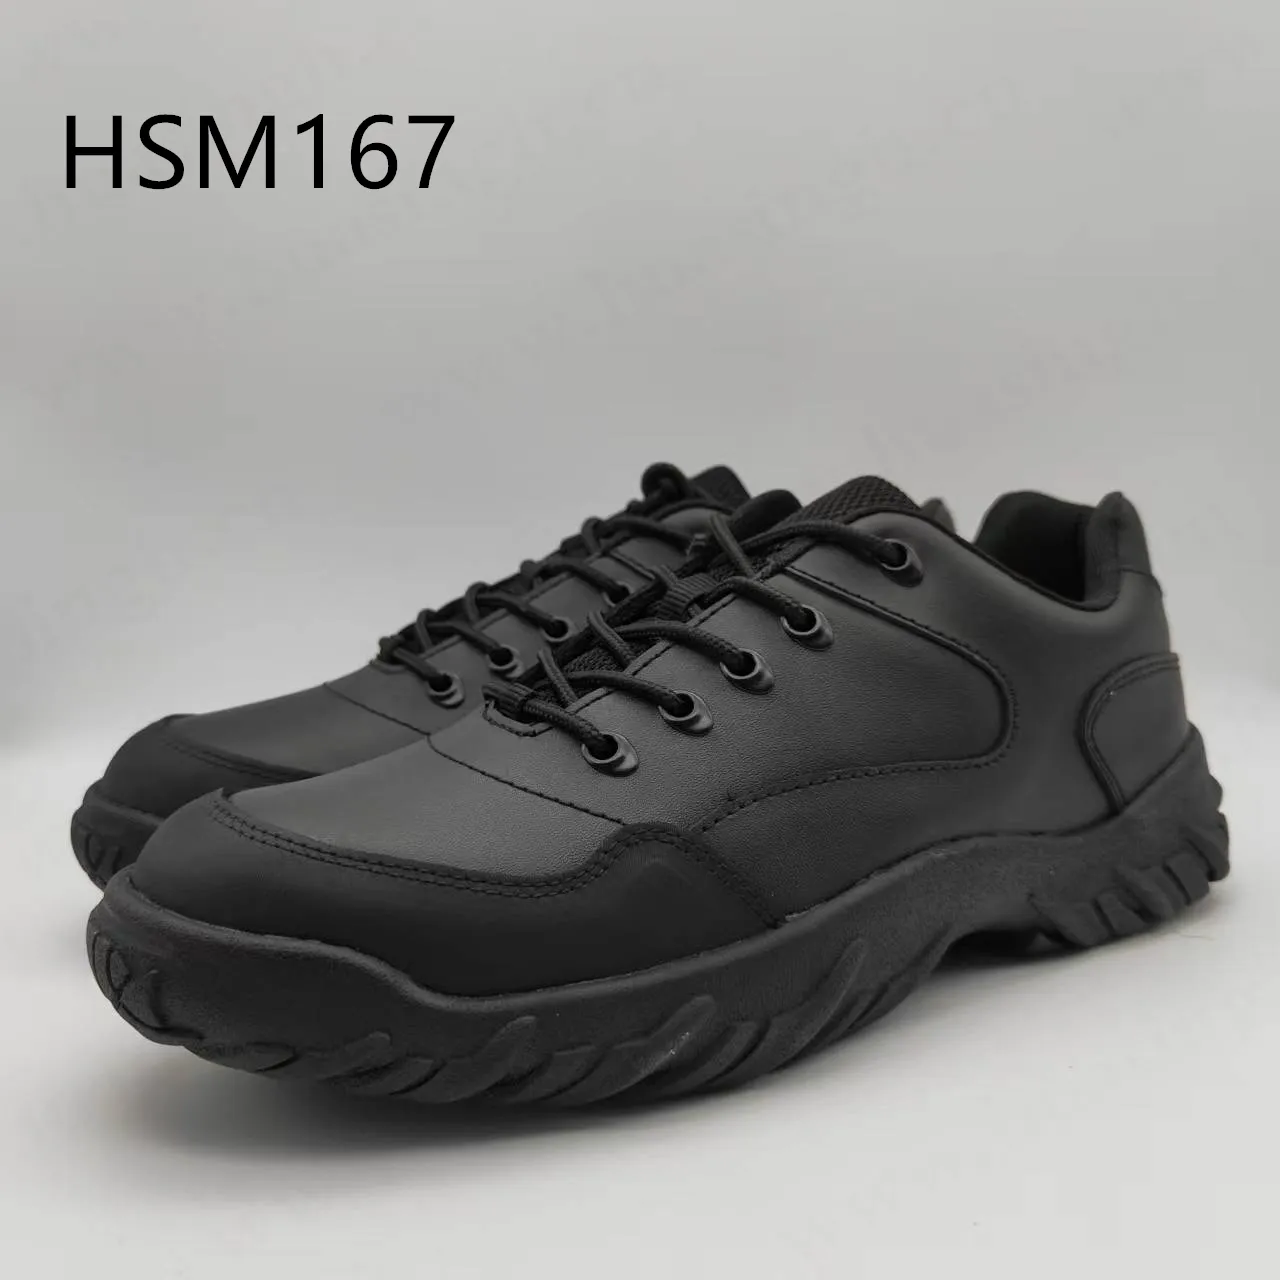 ZH,low-cut aging resistant sole essentials outdoor hiking shoes black anti-tear natural cow leather combat boots HSM167